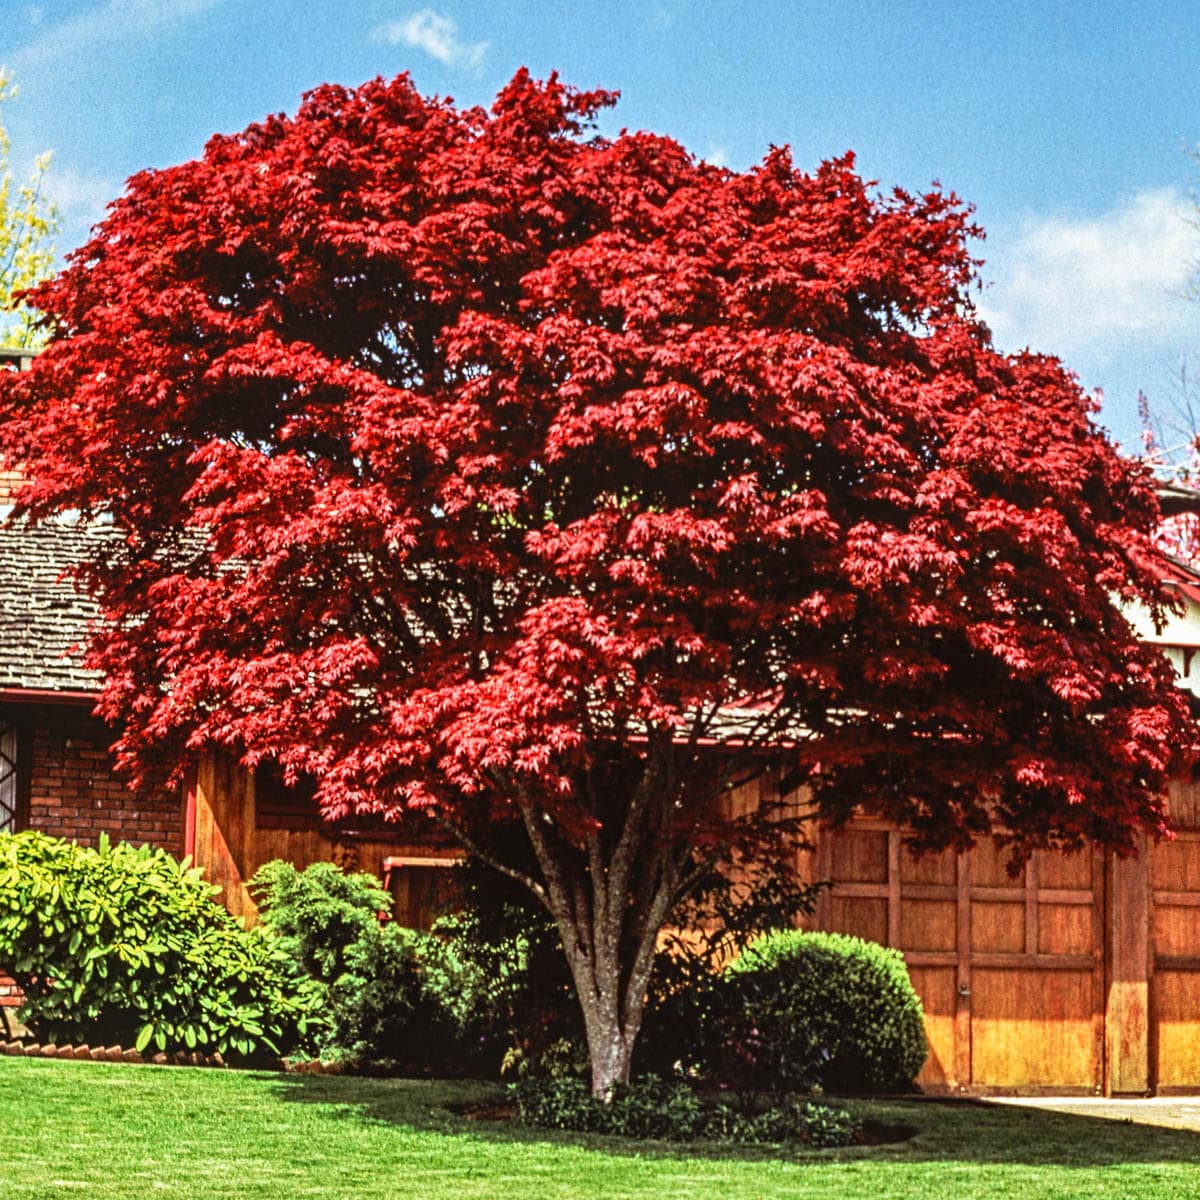 Gurney's Seed and Nursery Feature Red Leaf Japanese Maple Starter Tree in the Trees department at Lowes.com